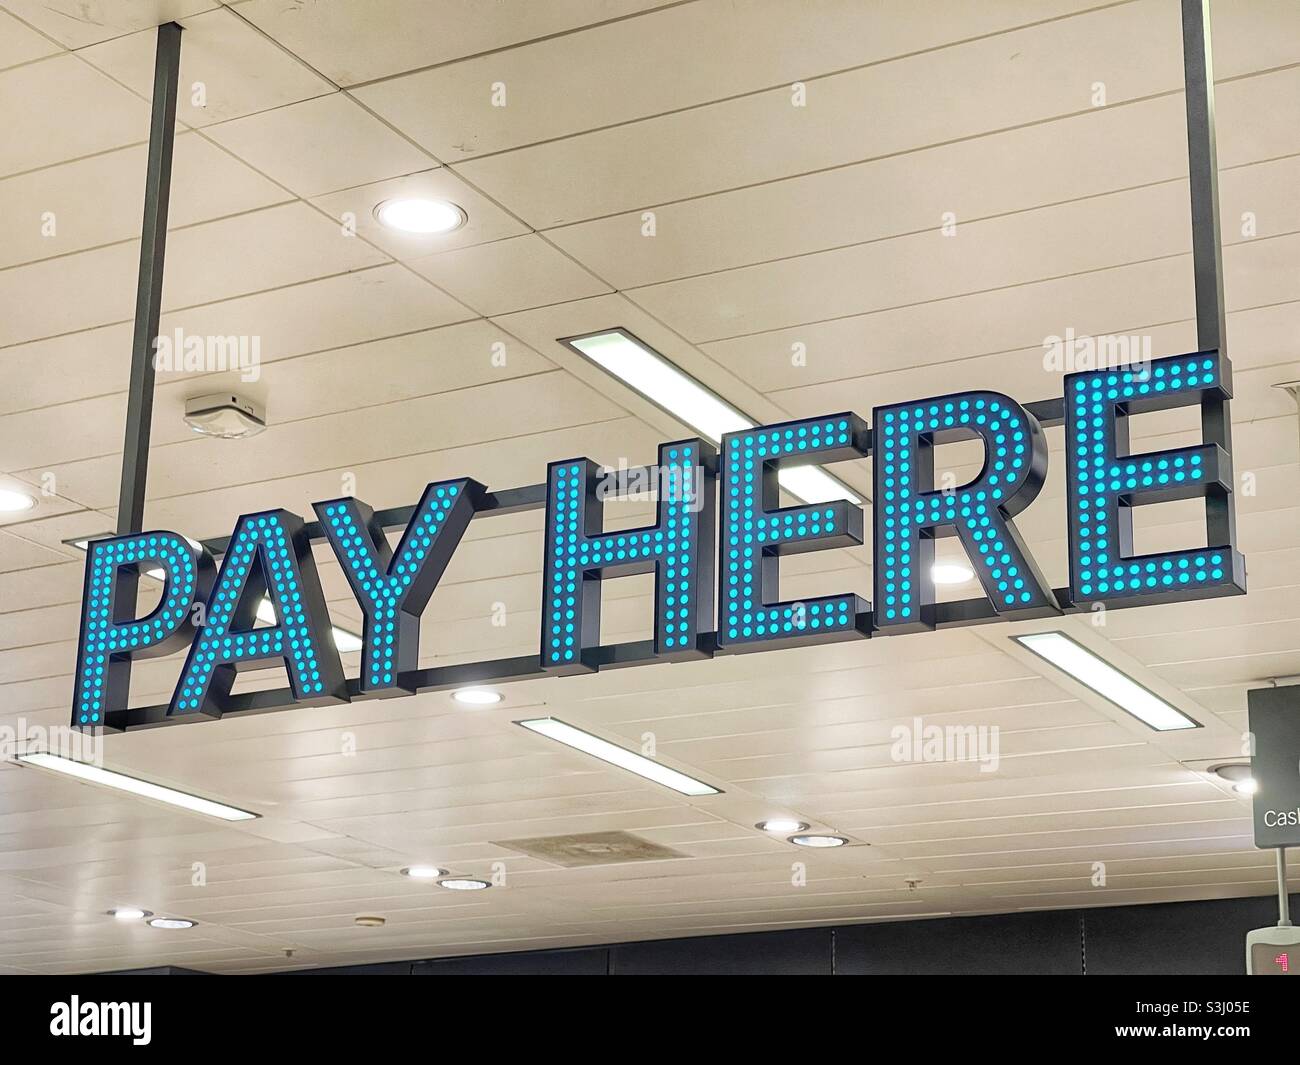 Illuminated Pay Here sign in a store showing shoppers where to pay for their goods Stock Photo